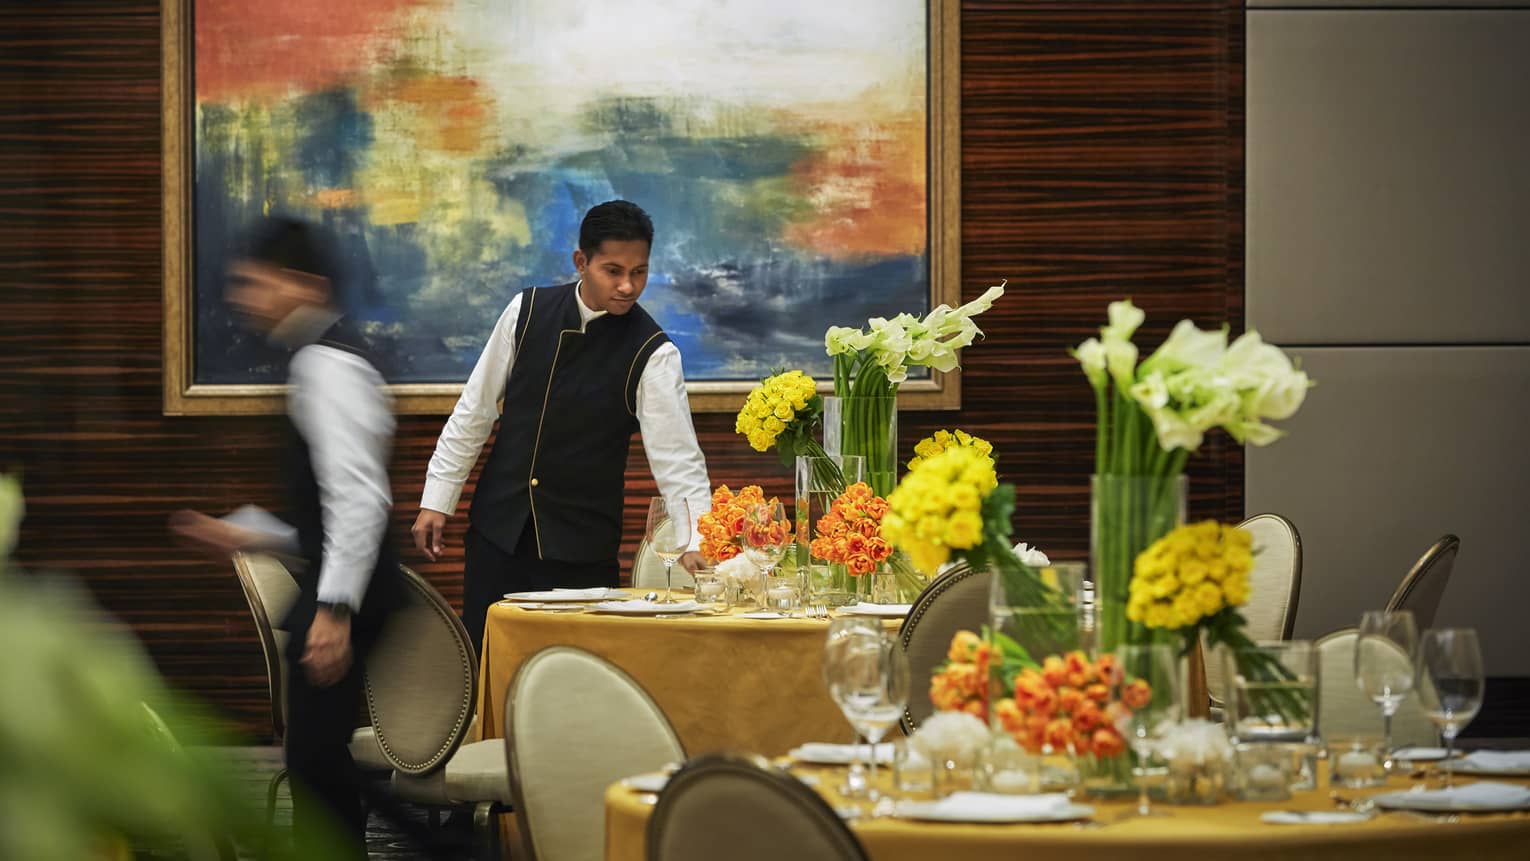 Server in black-and-white uniform sets round formal dining table with yellow linen, vases of fresh orange, yellow flowers